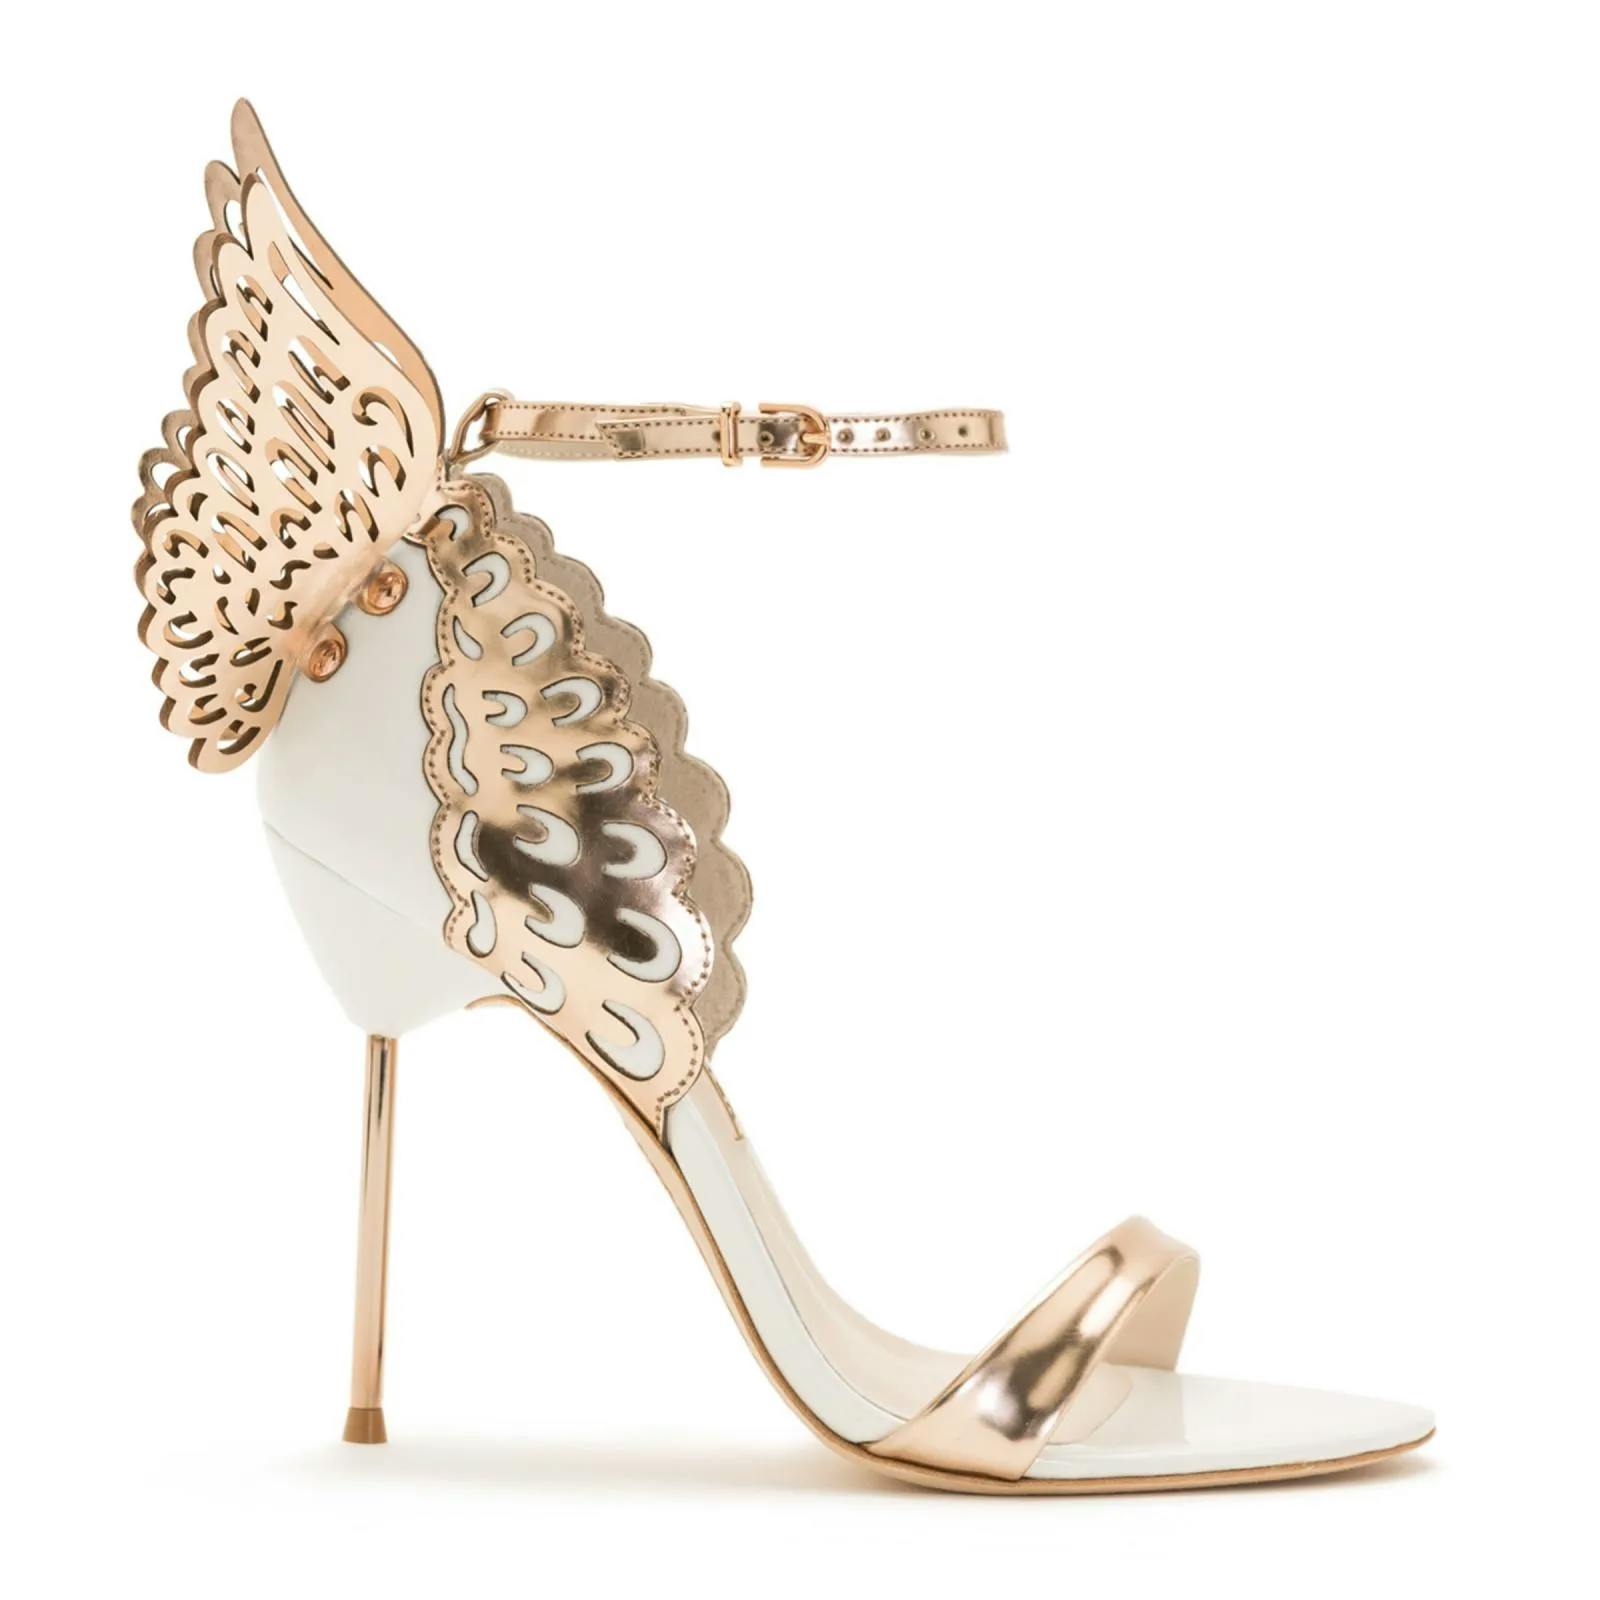 A metallic gold high-heeled sandal featuring intricate wing-like cutout designs on the heel and ankle strap. The elegant shoe has a thin stiletto heel, open toe, and a glossy finish, giving it a stylish and luxurious appearance.